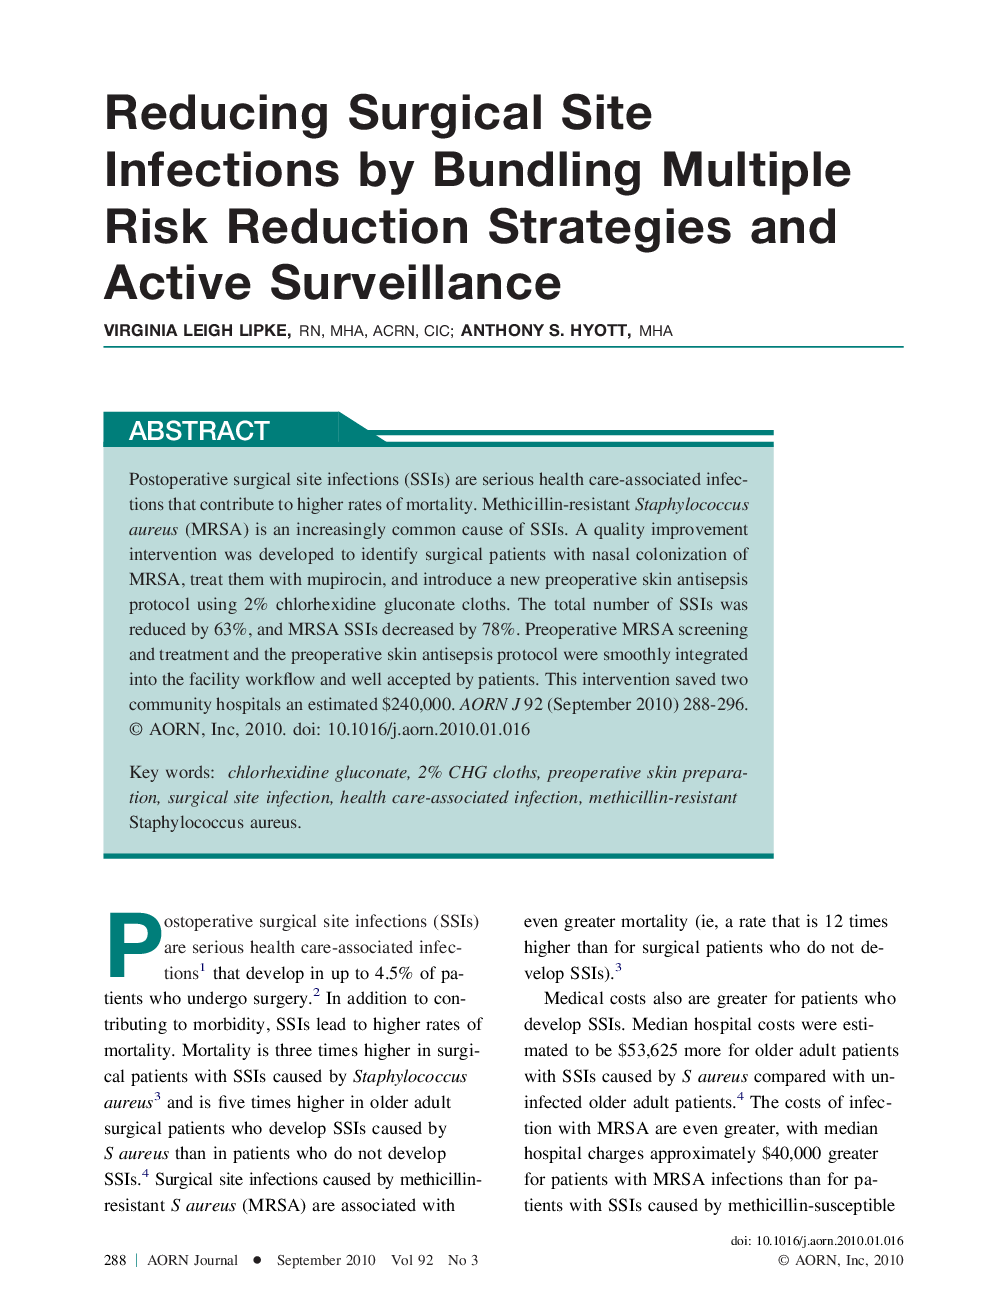 Reducing Surgical Site Infections by Bundling Multiple Risk Reduction Strategies and Active Surveillance